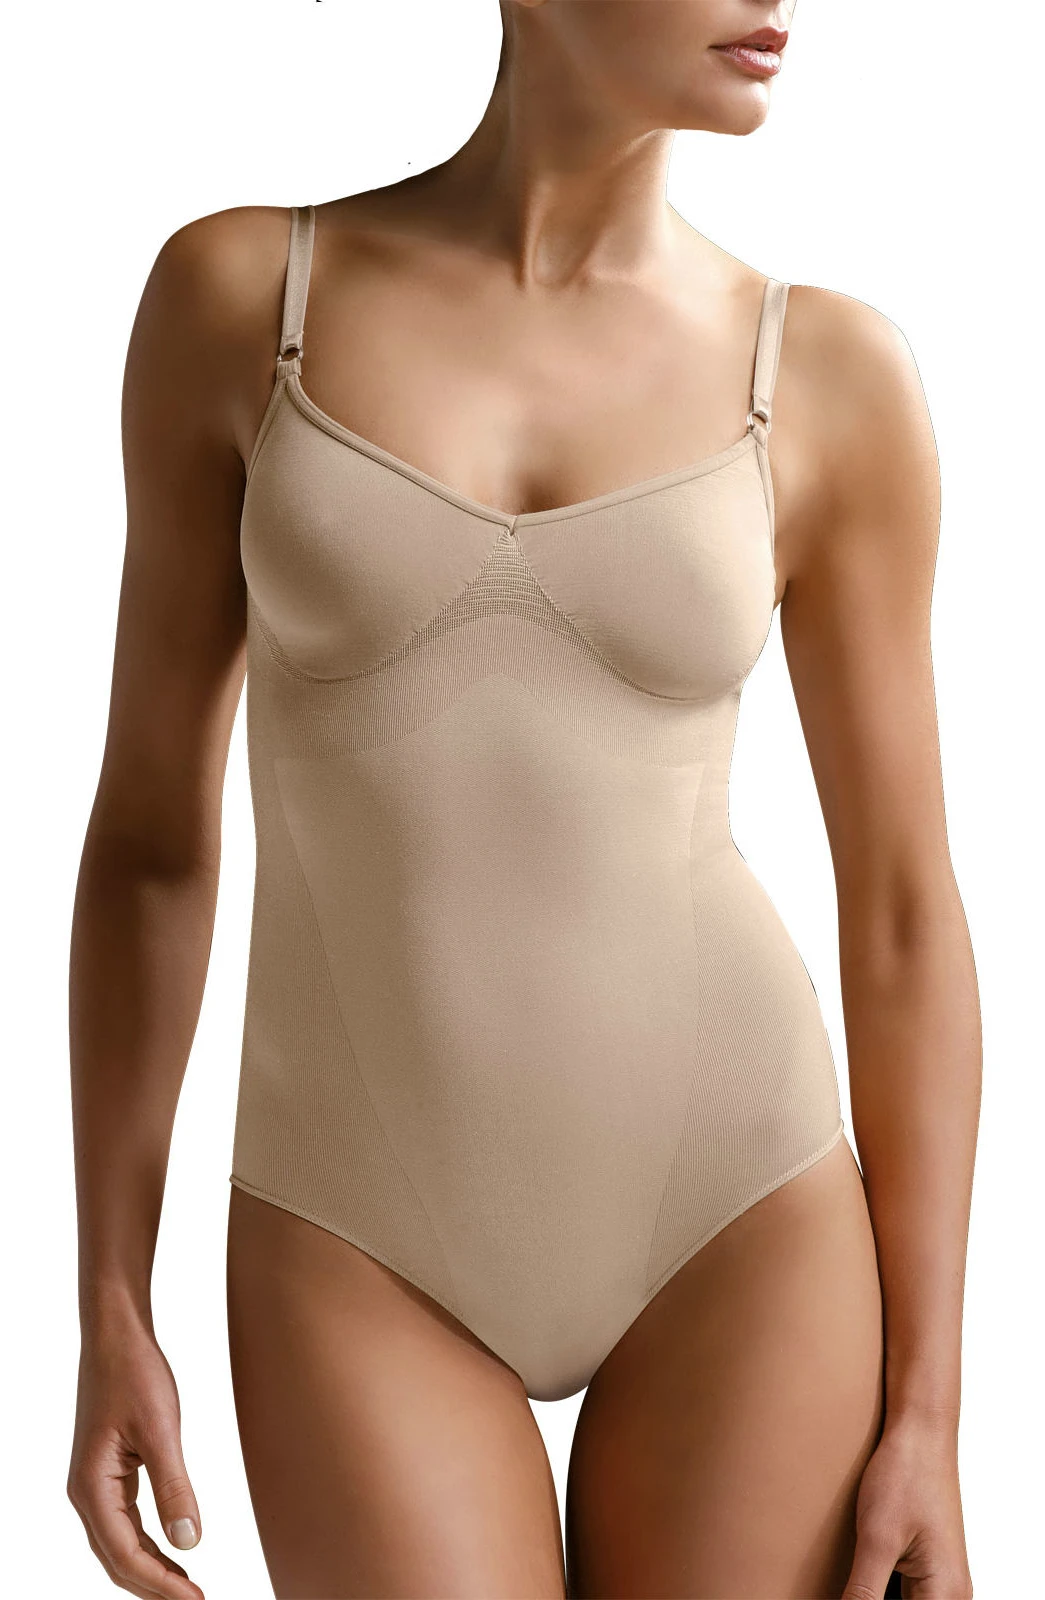 Control Body 510117 Shaping Body with Adjustable Straps